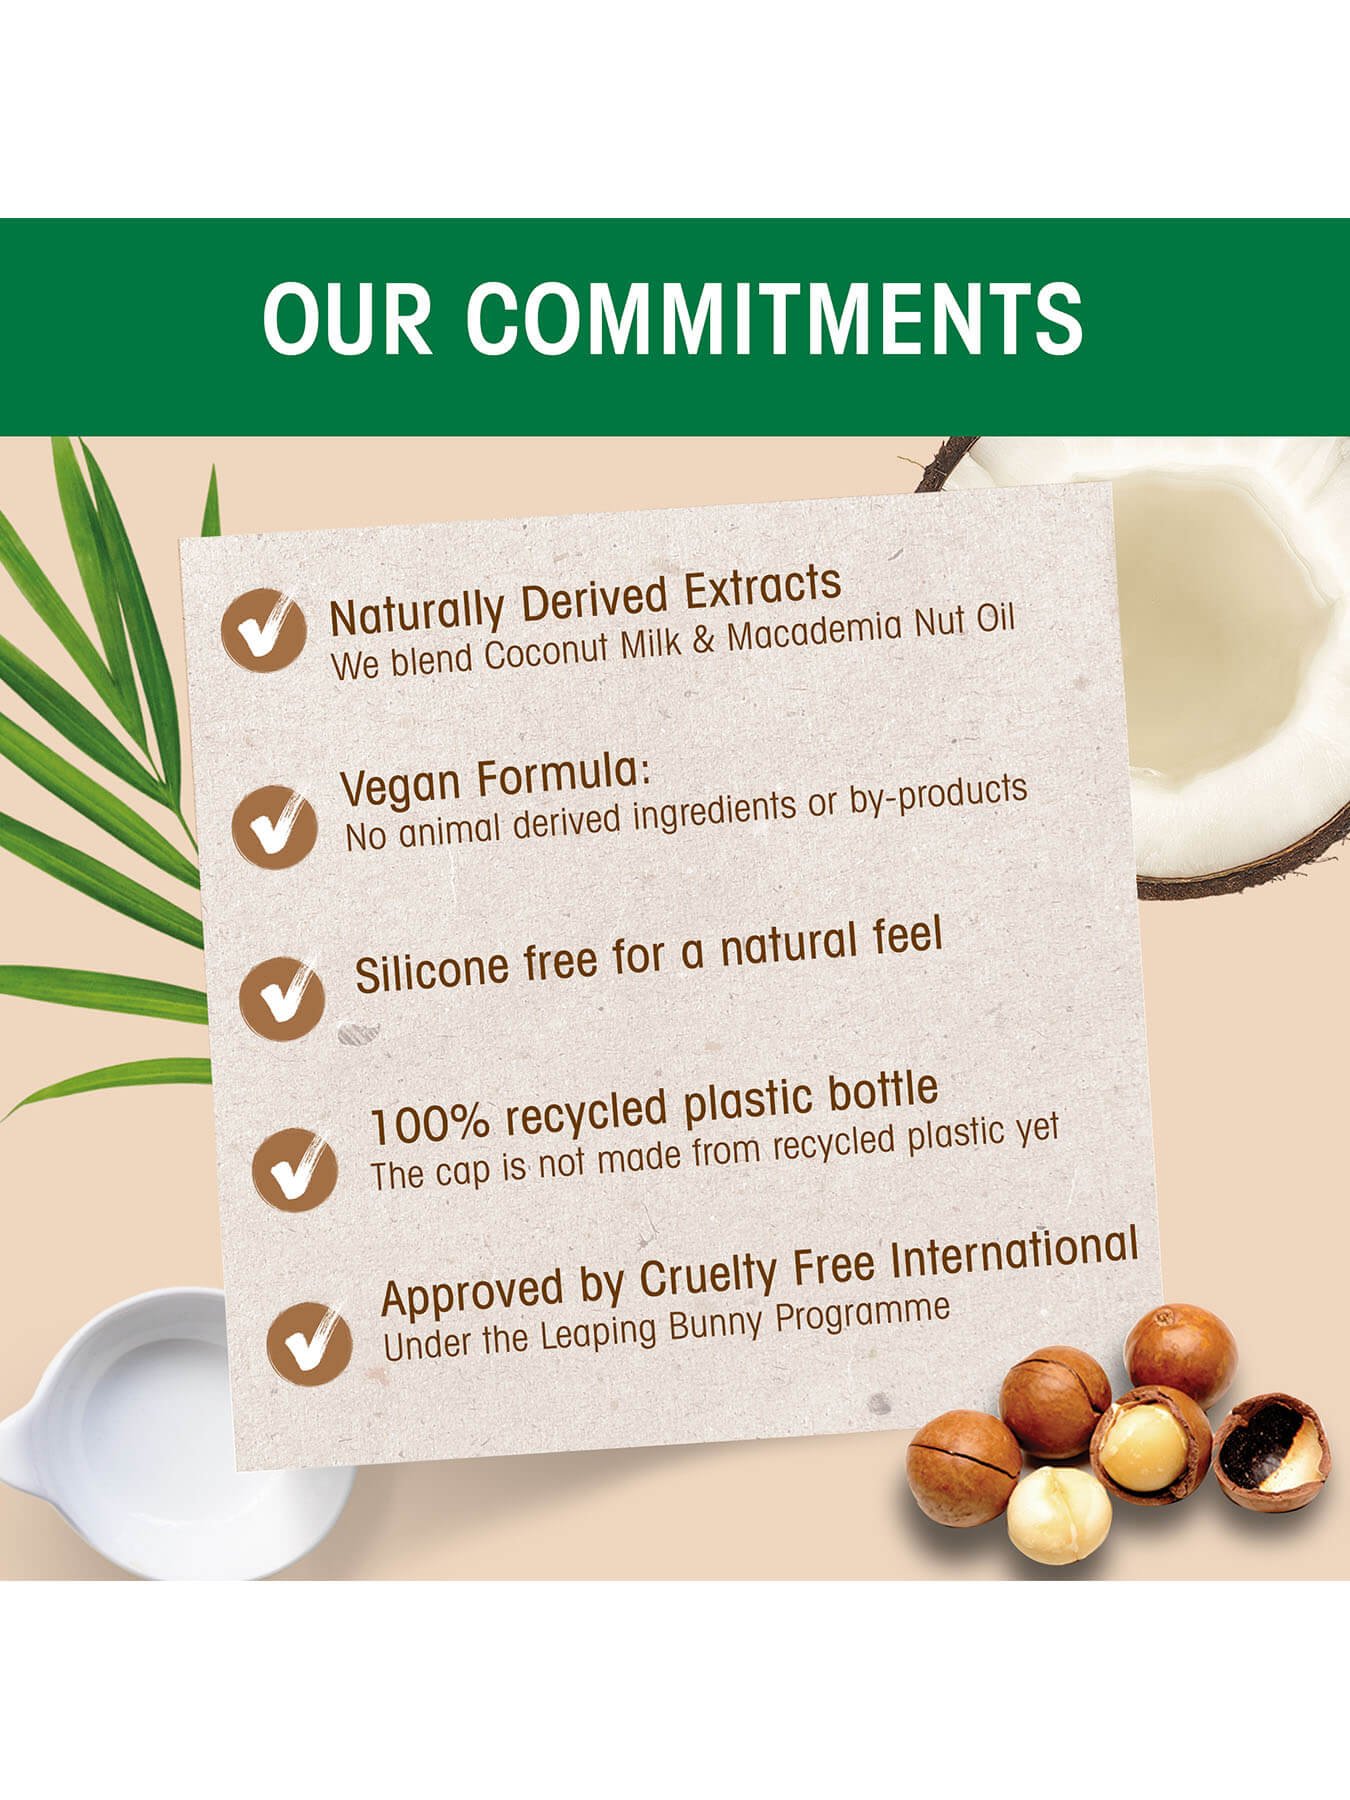 Ultimate Blends Coc Milk Condtioner commitments